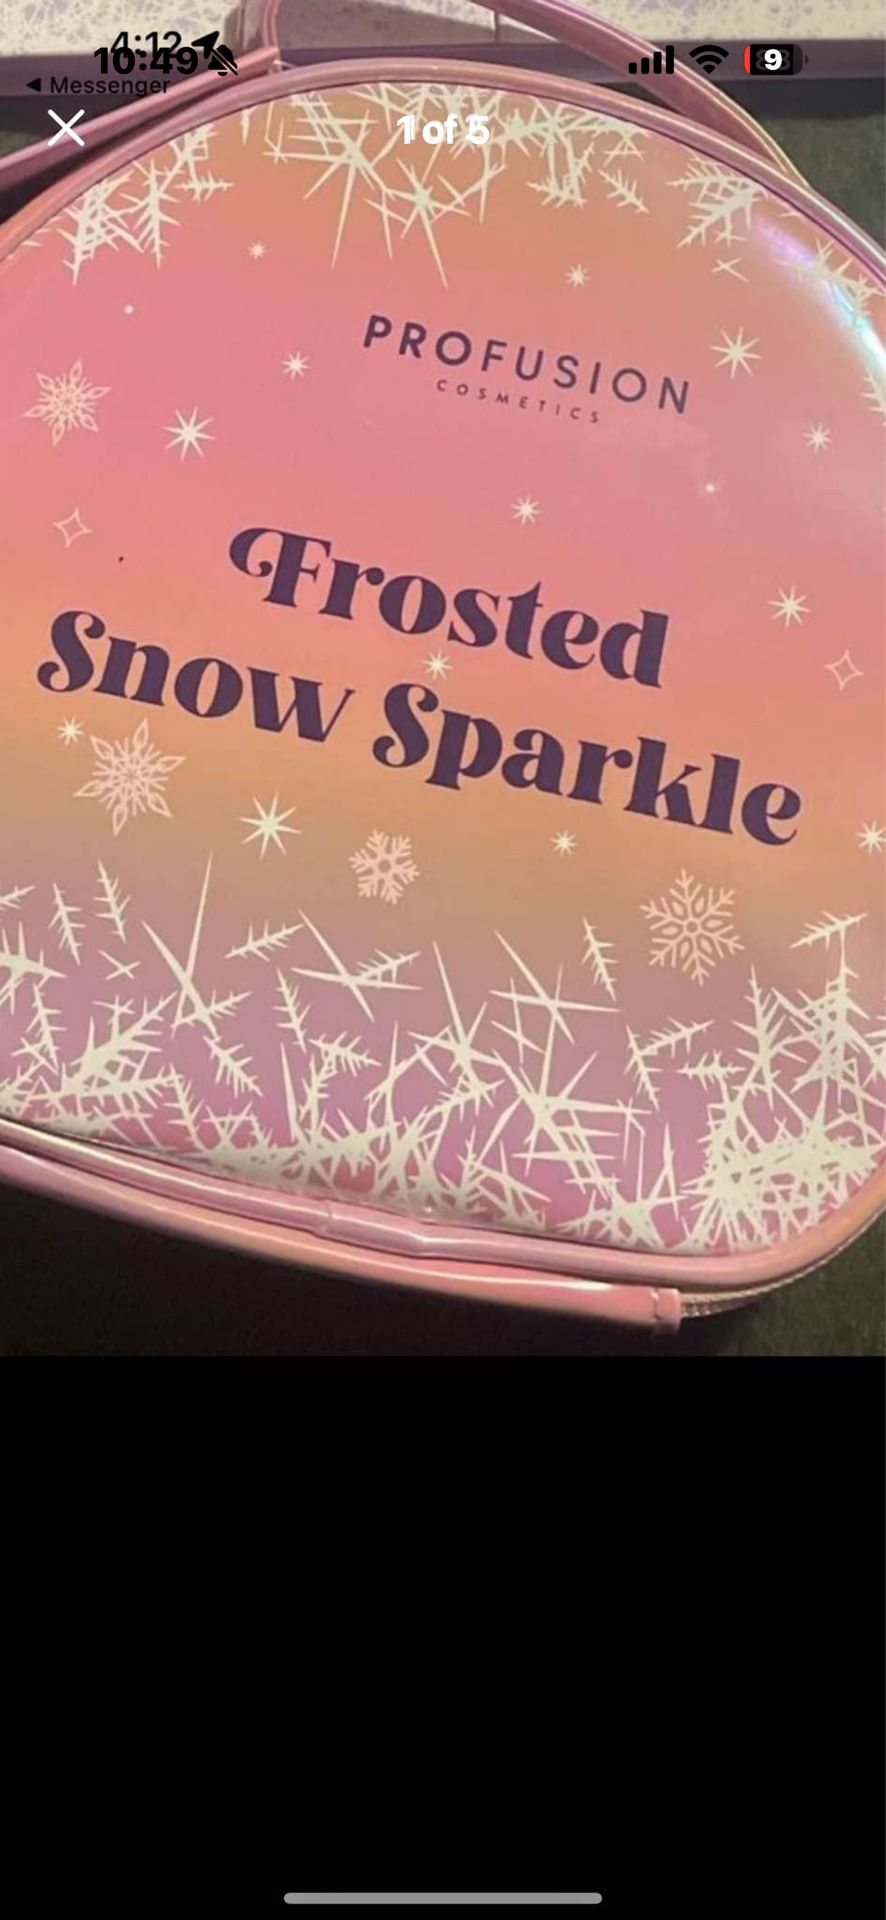 2 -Frosted Snow Sparkle New Make Up Set 